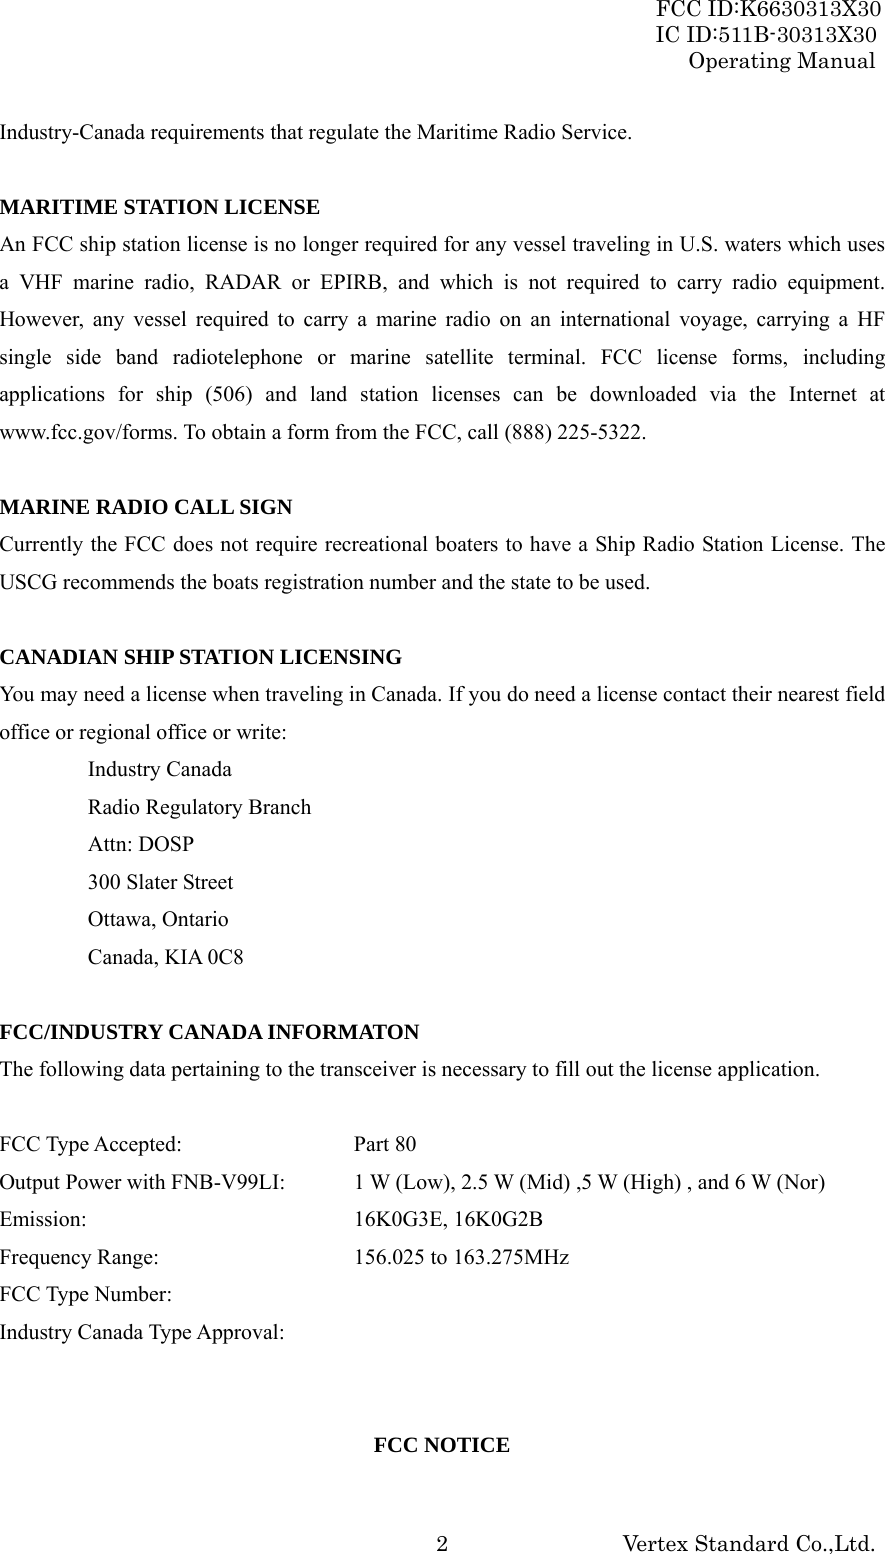 FCC ID:K6630313X30 IC ID:511B-30313X30 Operating Manual Vertex Standard Co.,Ltd. 2Industry-Canada requirements that regulate the Maritime Radio Service.  MARITIME STATION LICENSE An FCC ship station license is no longer required for any vessel traveling in U.S. waters which uses a VHF marine radio, RADAR or EPIRB, and which is not required to carry radio equipment. However, any vessel required to carry a marine radio on an international voyage, carrying a HF single side band radiotelephone or marine satellite terminal. FCC license forms, including applications for ship (506) and land station licenses can be downloaded via the Internet at www.fcc.gov/forms. To obtain a form from the FCC, call (888) 225-5322.  MARINE RADIO CALL SIGN Currently the FCC does not require recreational boaters to have a Ship Radio Station License. The USCG recommends the boats registration number and the state to be used.  CANADIAN SHIP STATION LICENSING You may need a license when traveling in Canada. If you do need a license contact their nearest field office or regional office or write: Industry Canada Radio Regulatory Branch Attn: DOSP 300 Slater Street Ottawa, Ontario Canada, KIA 0C8  FCC/INDUSTRY CANADA INFORMATON The following data pertaining to the transceiver is necessary to fill out the license application.  FCC Type Accepted:    Part 80 Output Power with FNB-V99LI:  1 W (Low), 2.5 W (Mid) ,5 W (High) , and 6 W (Nor) Emission:    16K0G3E, 16K0G2B Frequency Range:      156.025 to 163.275MHz FCC Type Number:      Industry Canada Type Approval:     FCC NOTICE 